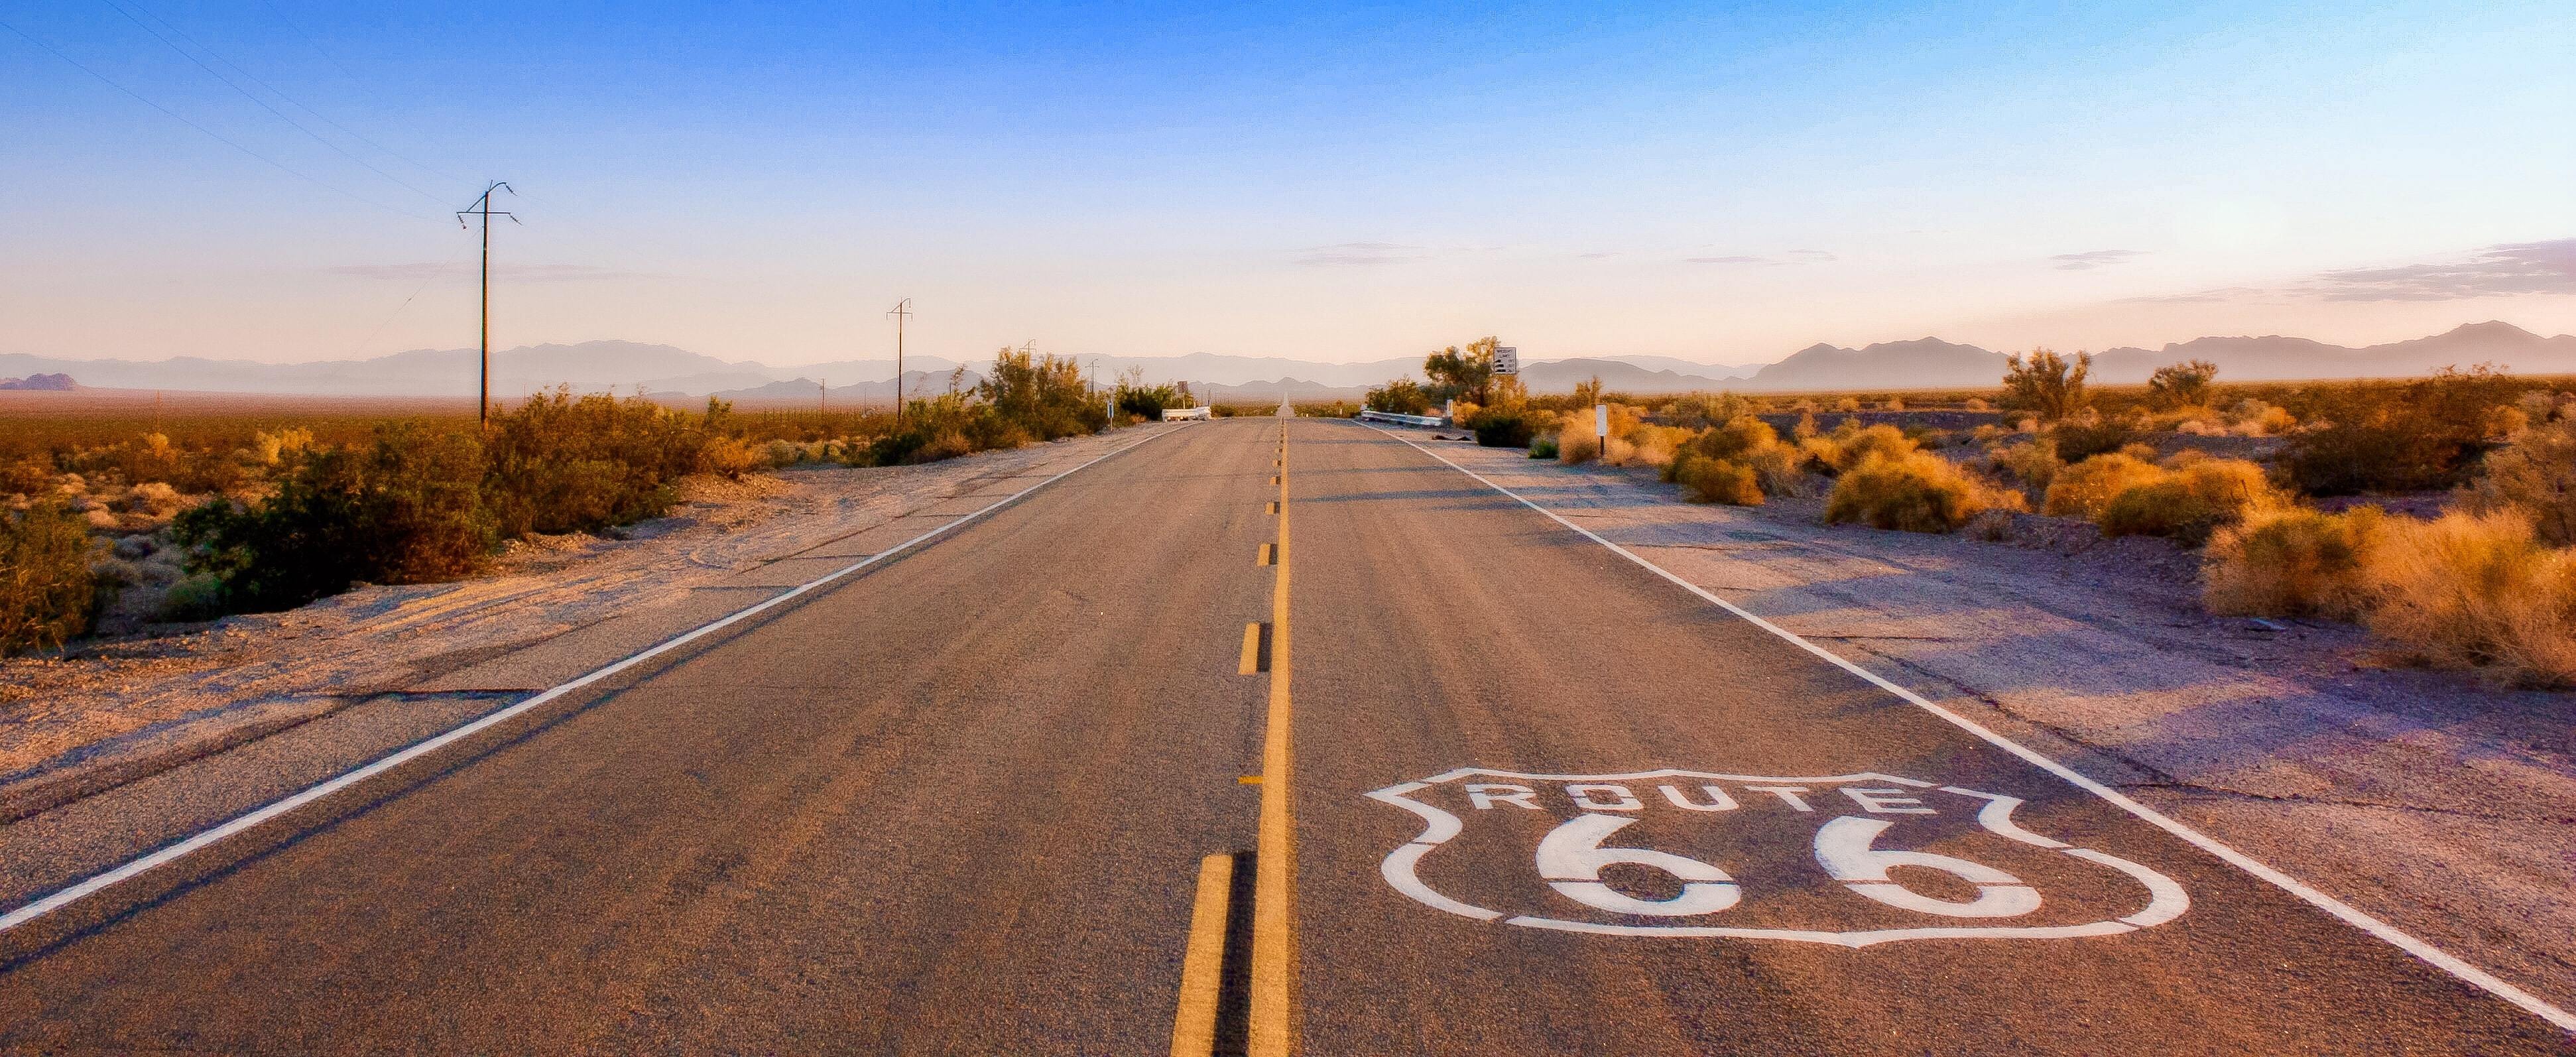 empty road on Route 66 with route 66 logo